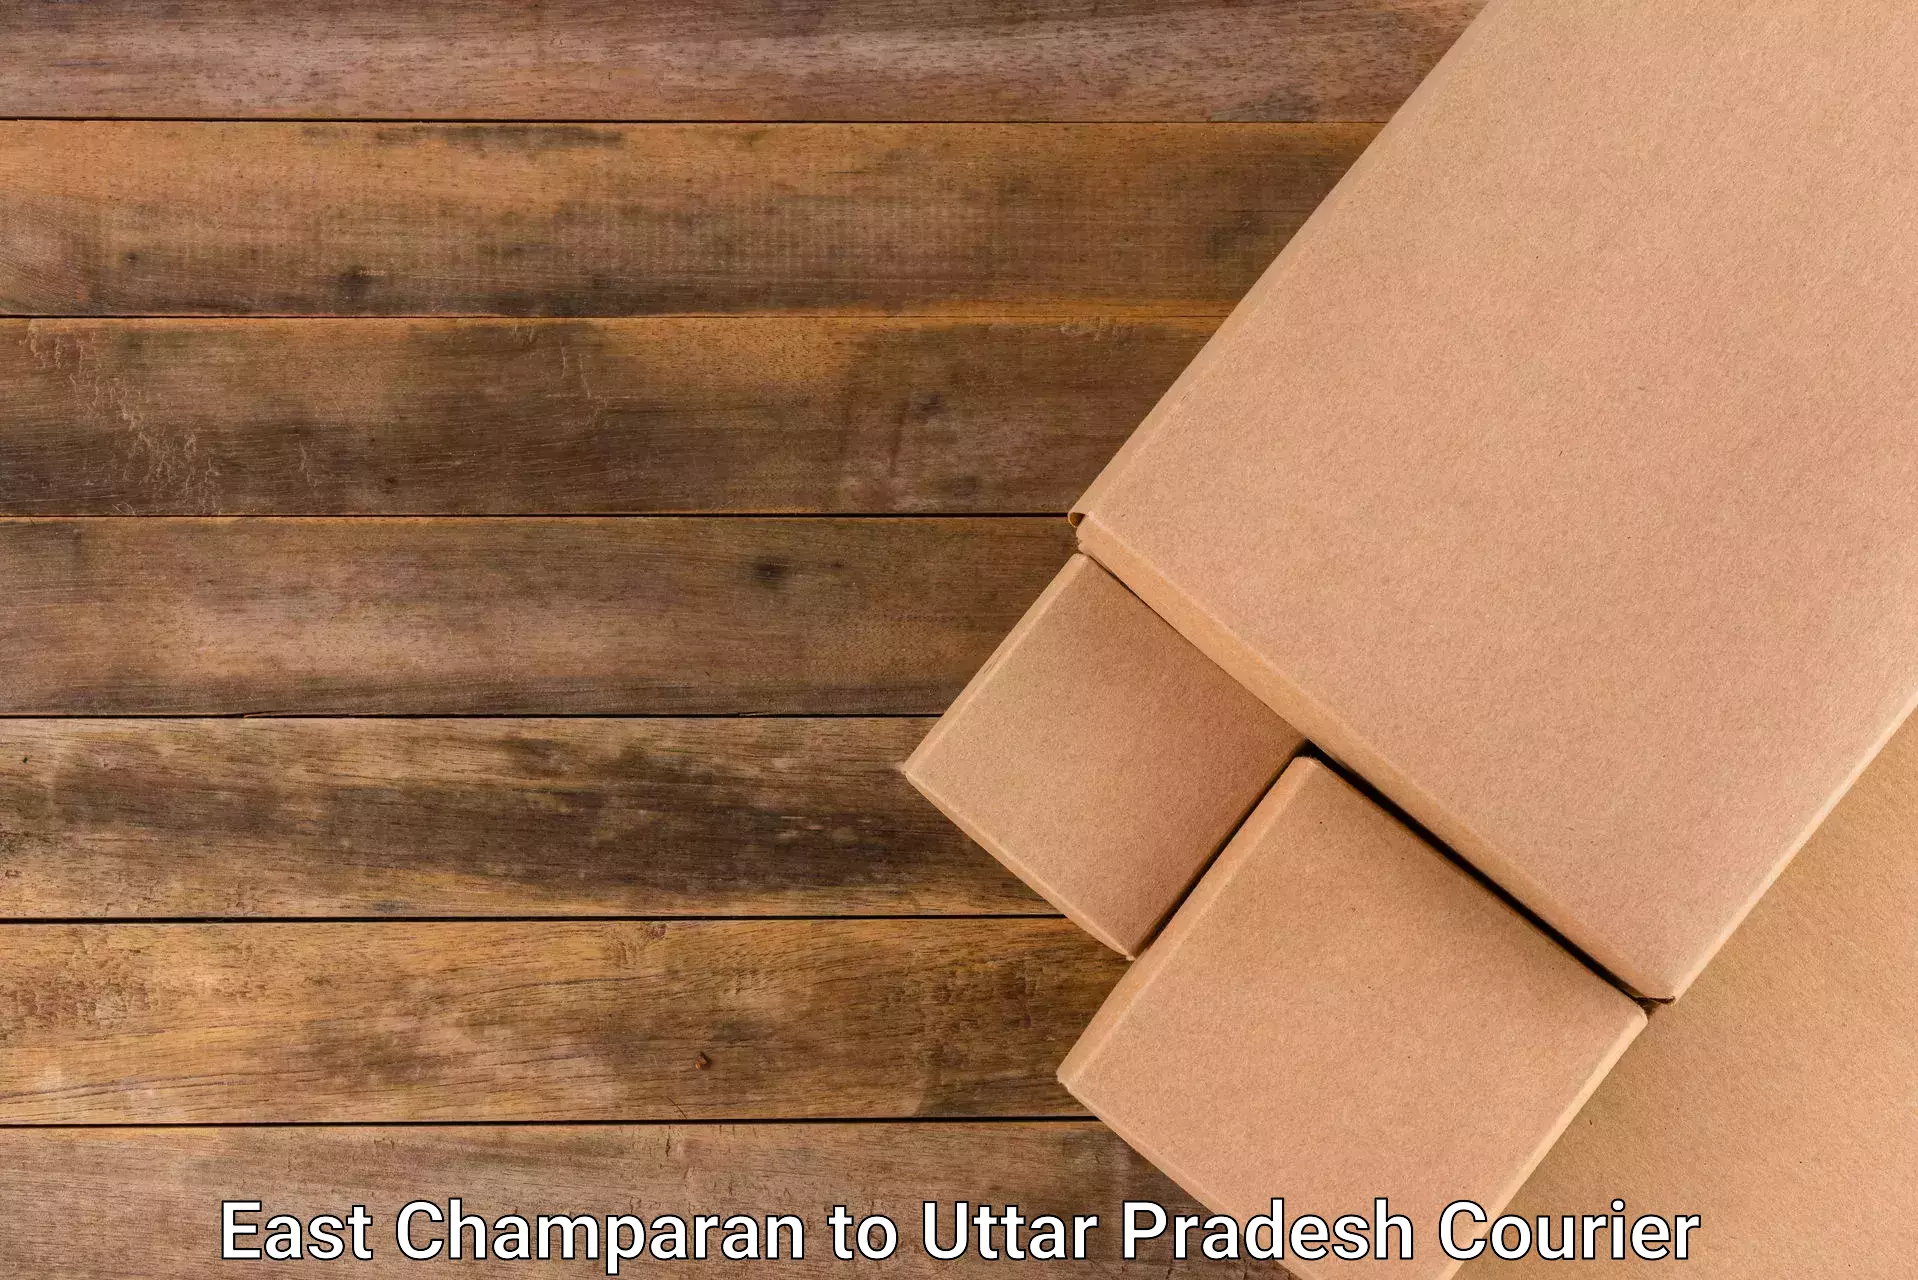 Sustainable courier practices in East Champaran to Lakhimpur